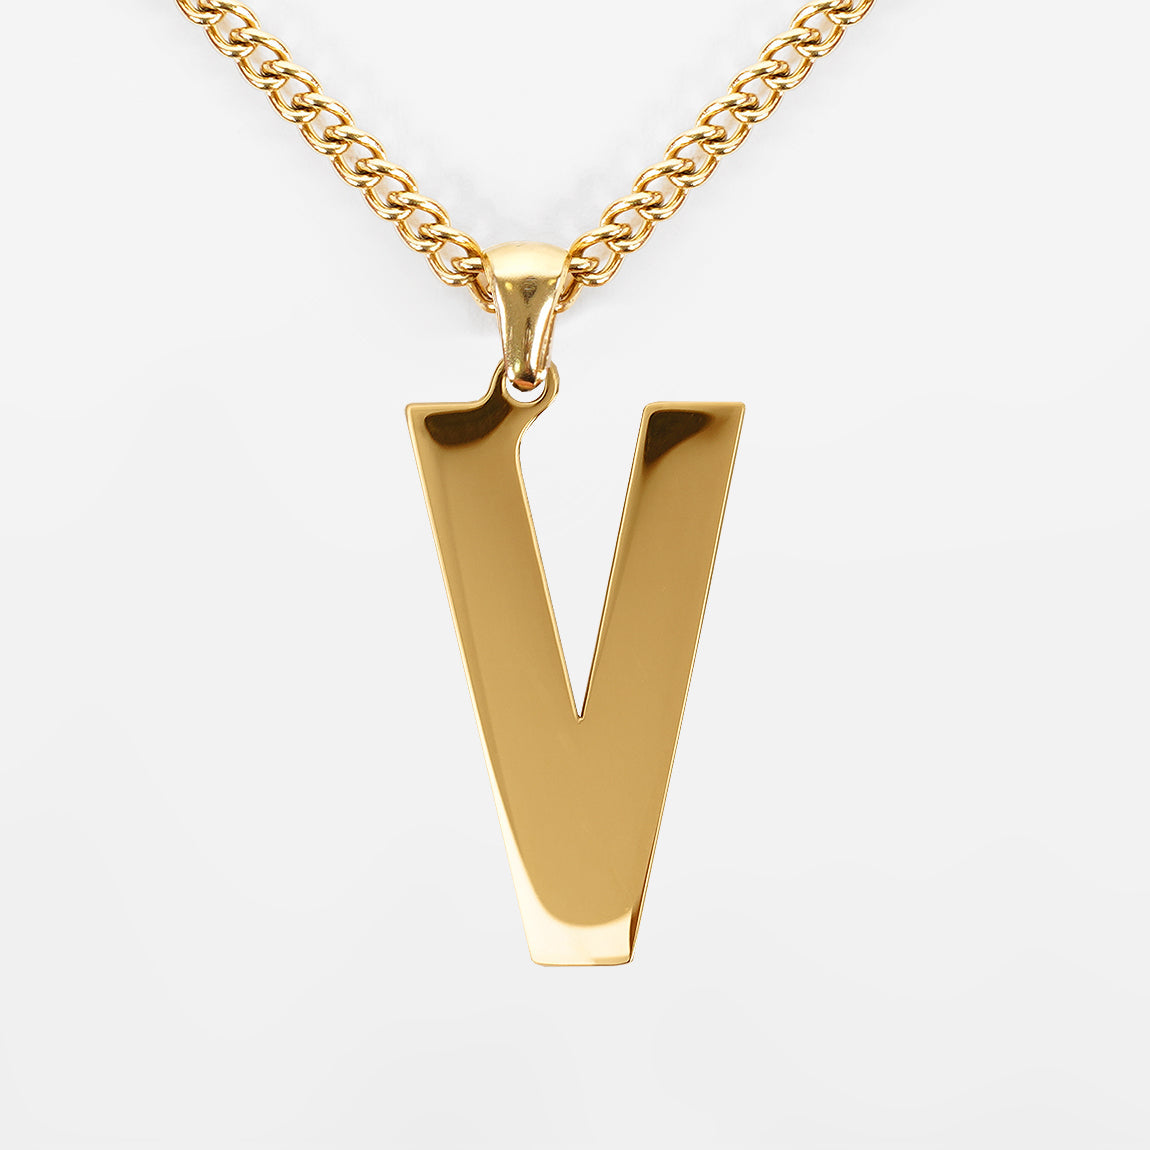 V Letter Pendant with Chain Kids Necklace - Gold Plated Stainless Steel